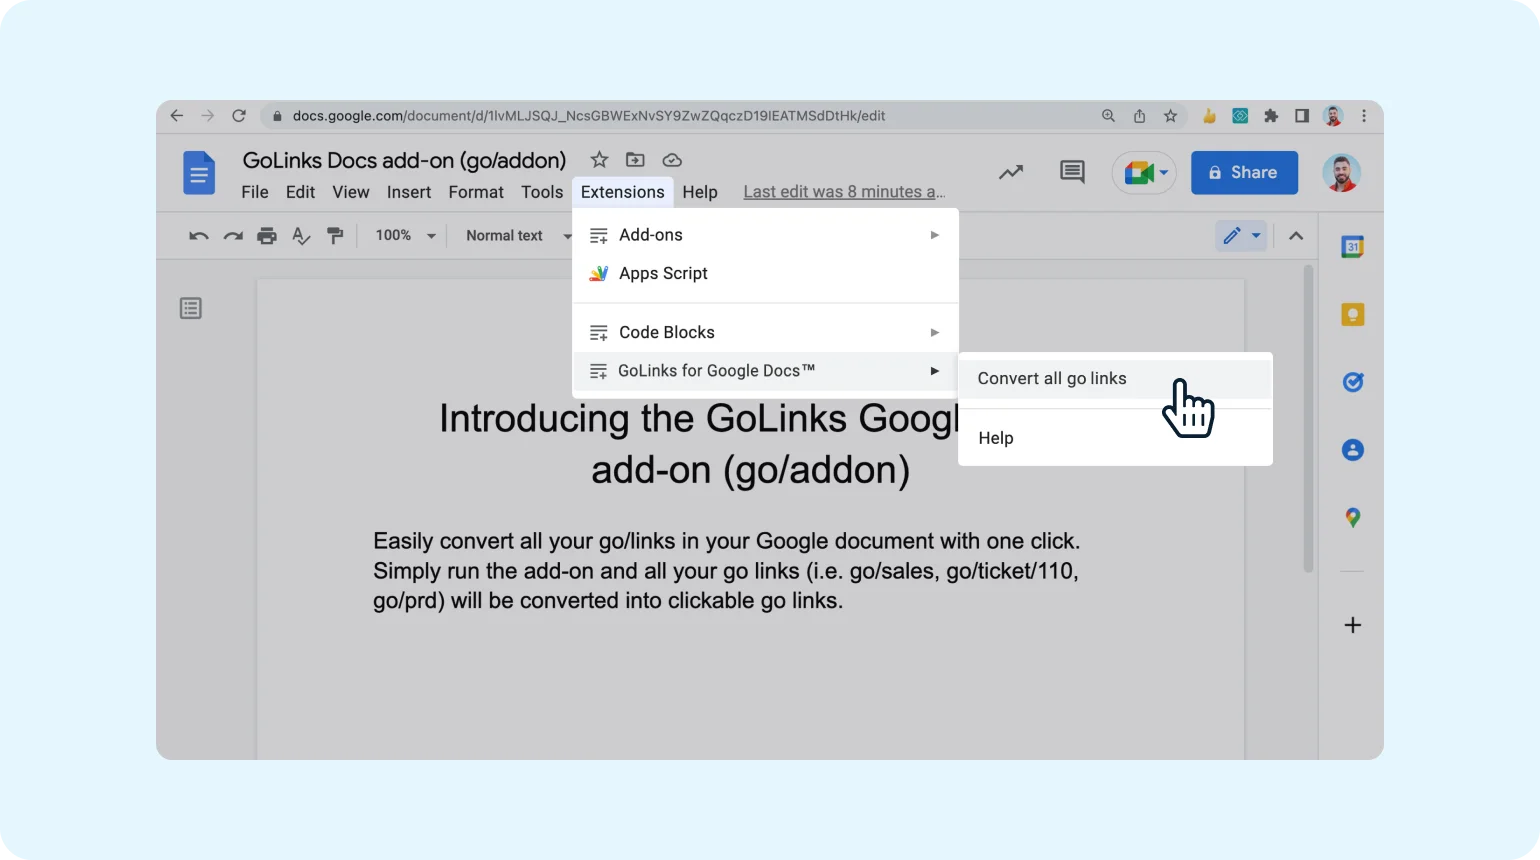 Converting go links in a Google Doc